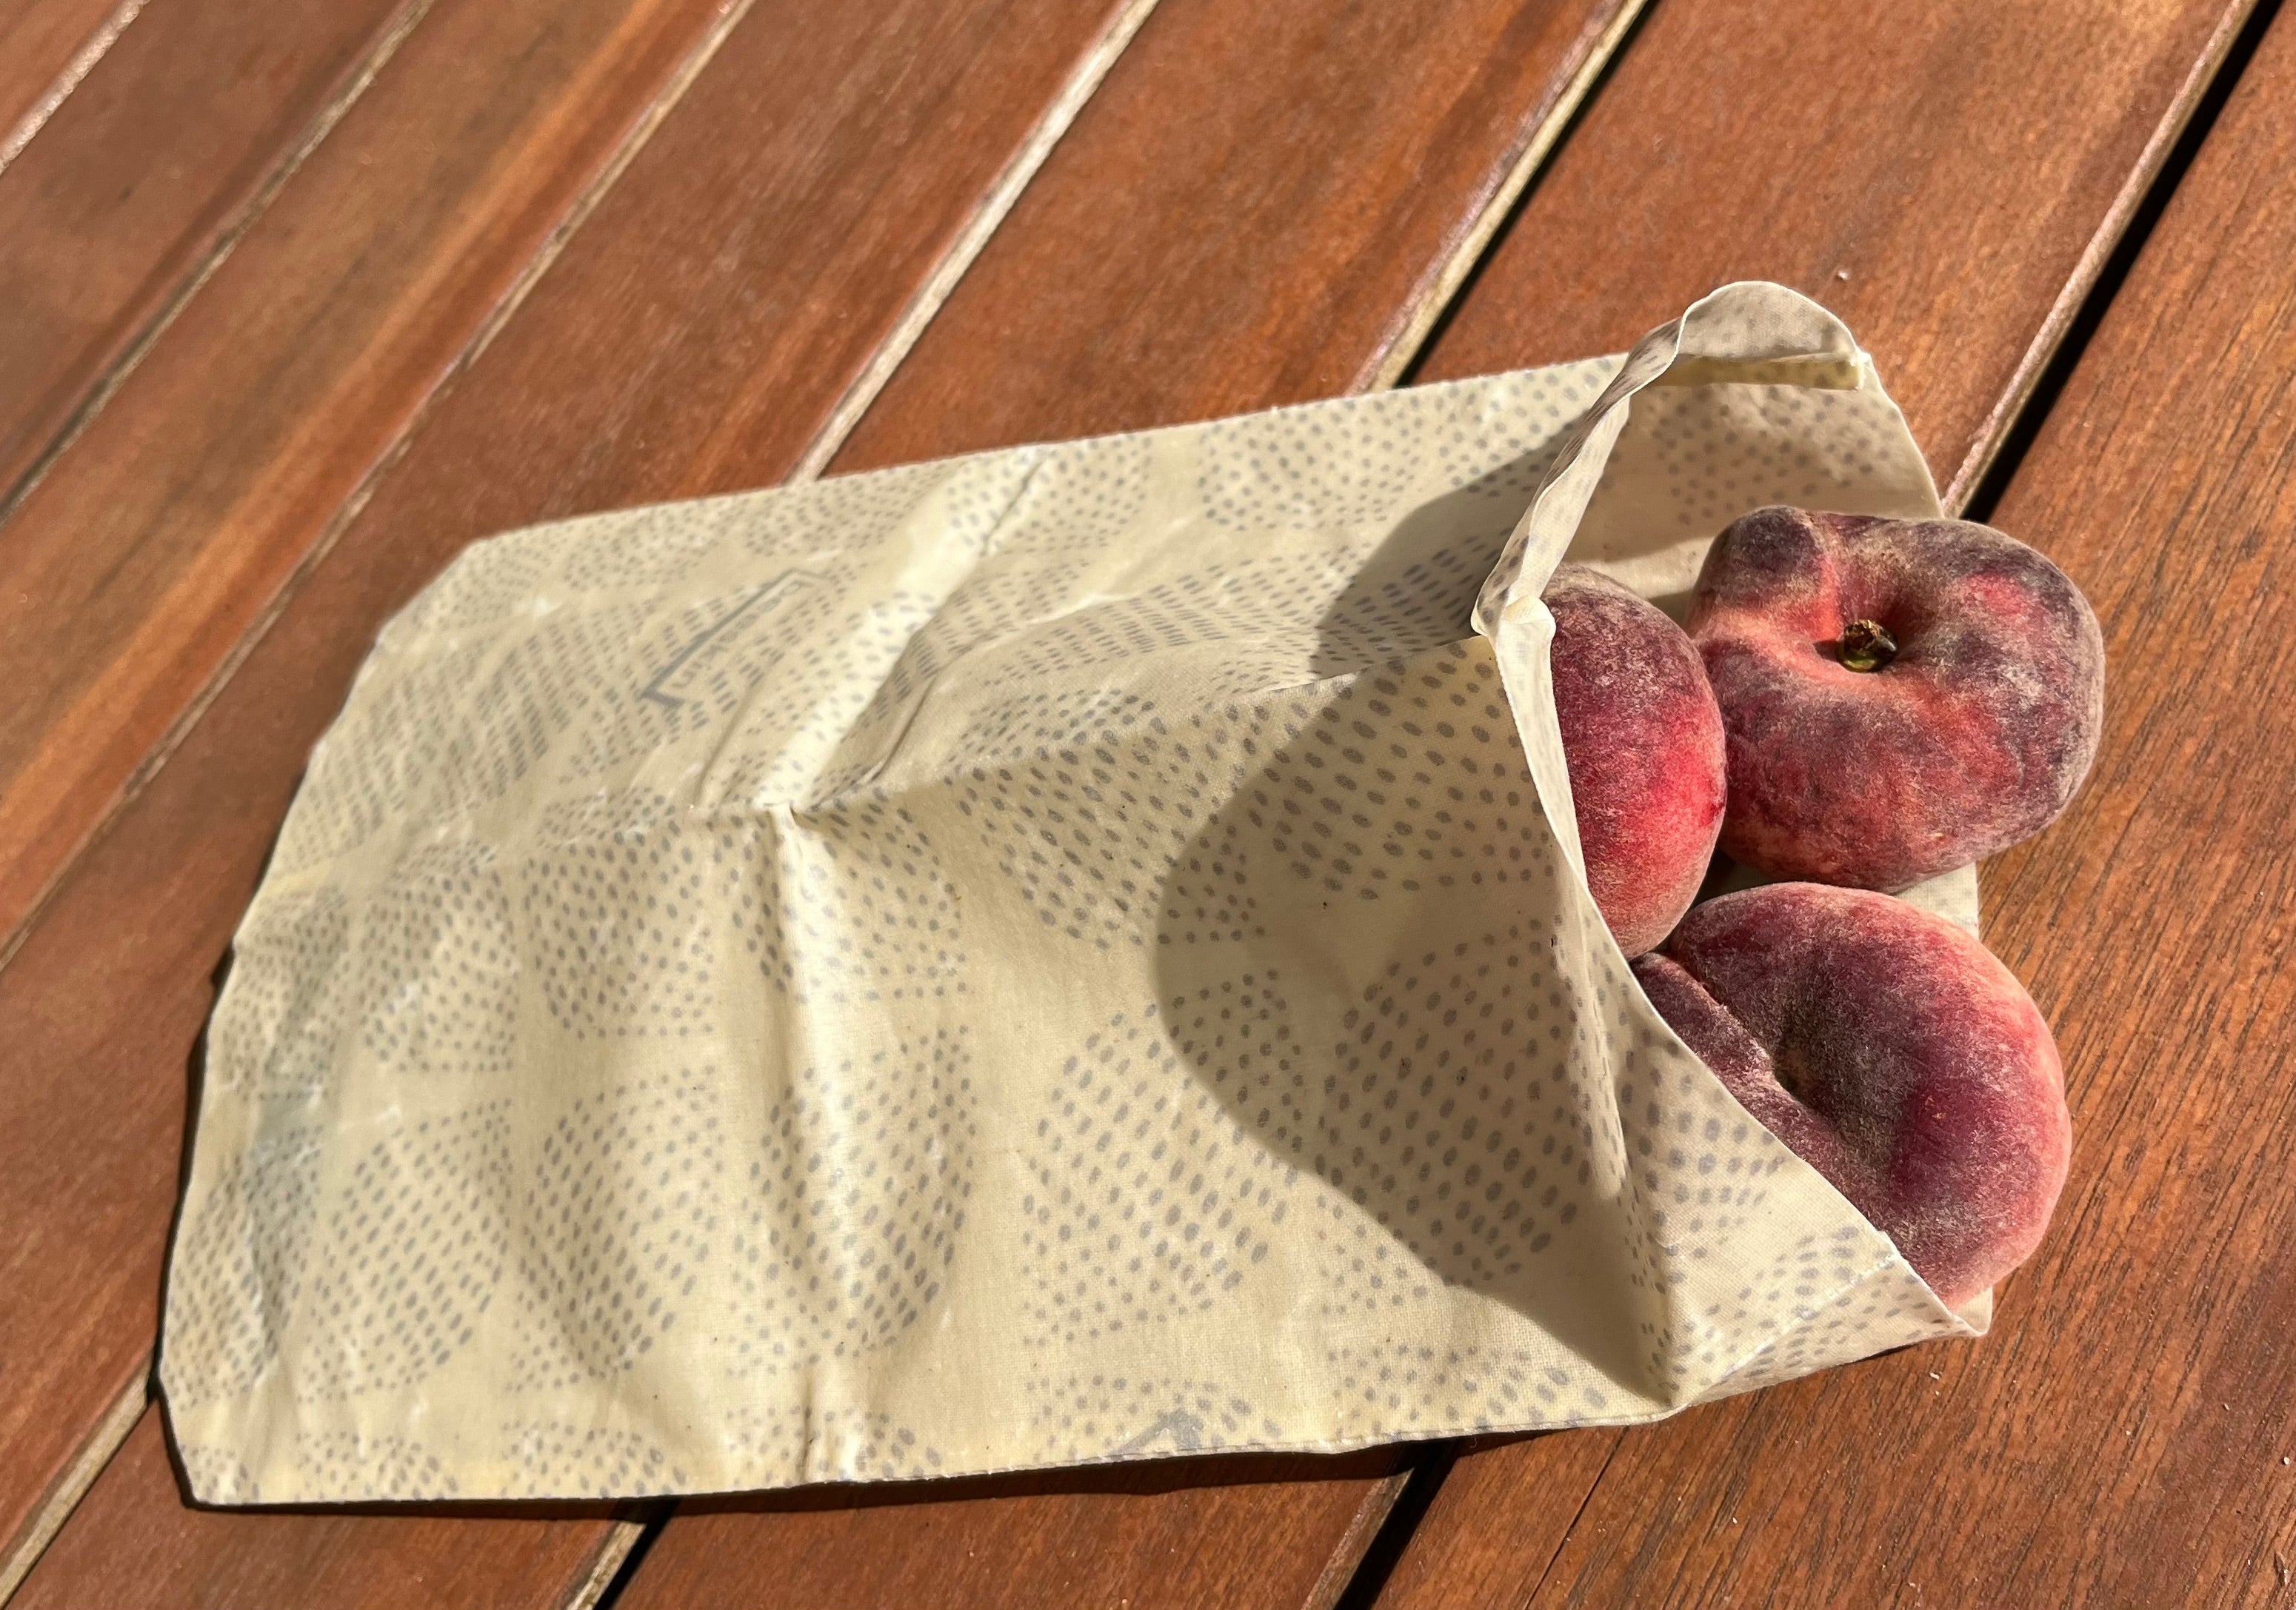 Bag S scandic design filled with peaches on a wooden table